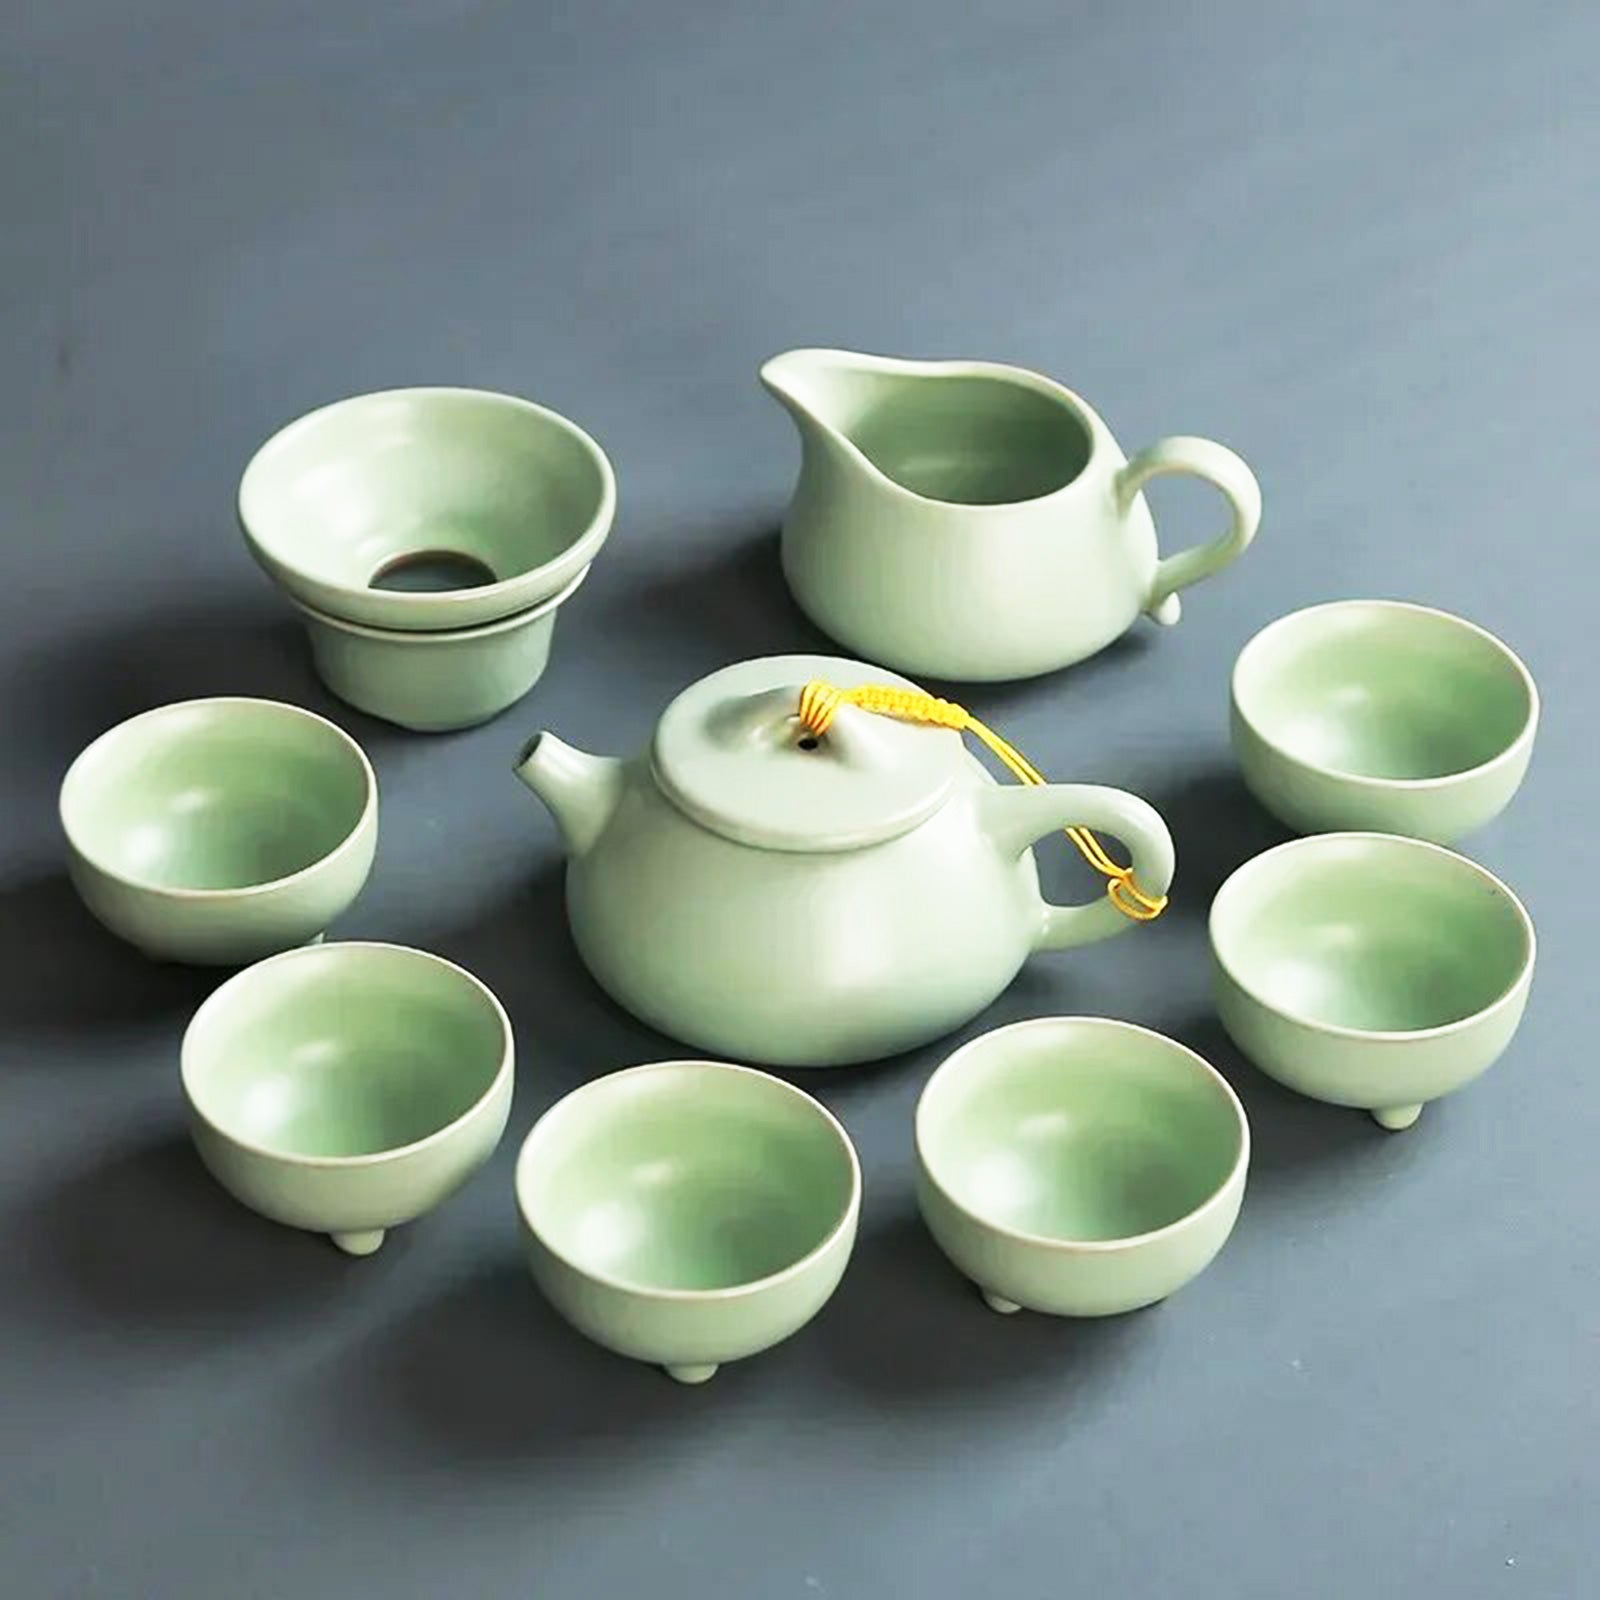 Deluxe Chinese Tea Set in Vintage Green Color